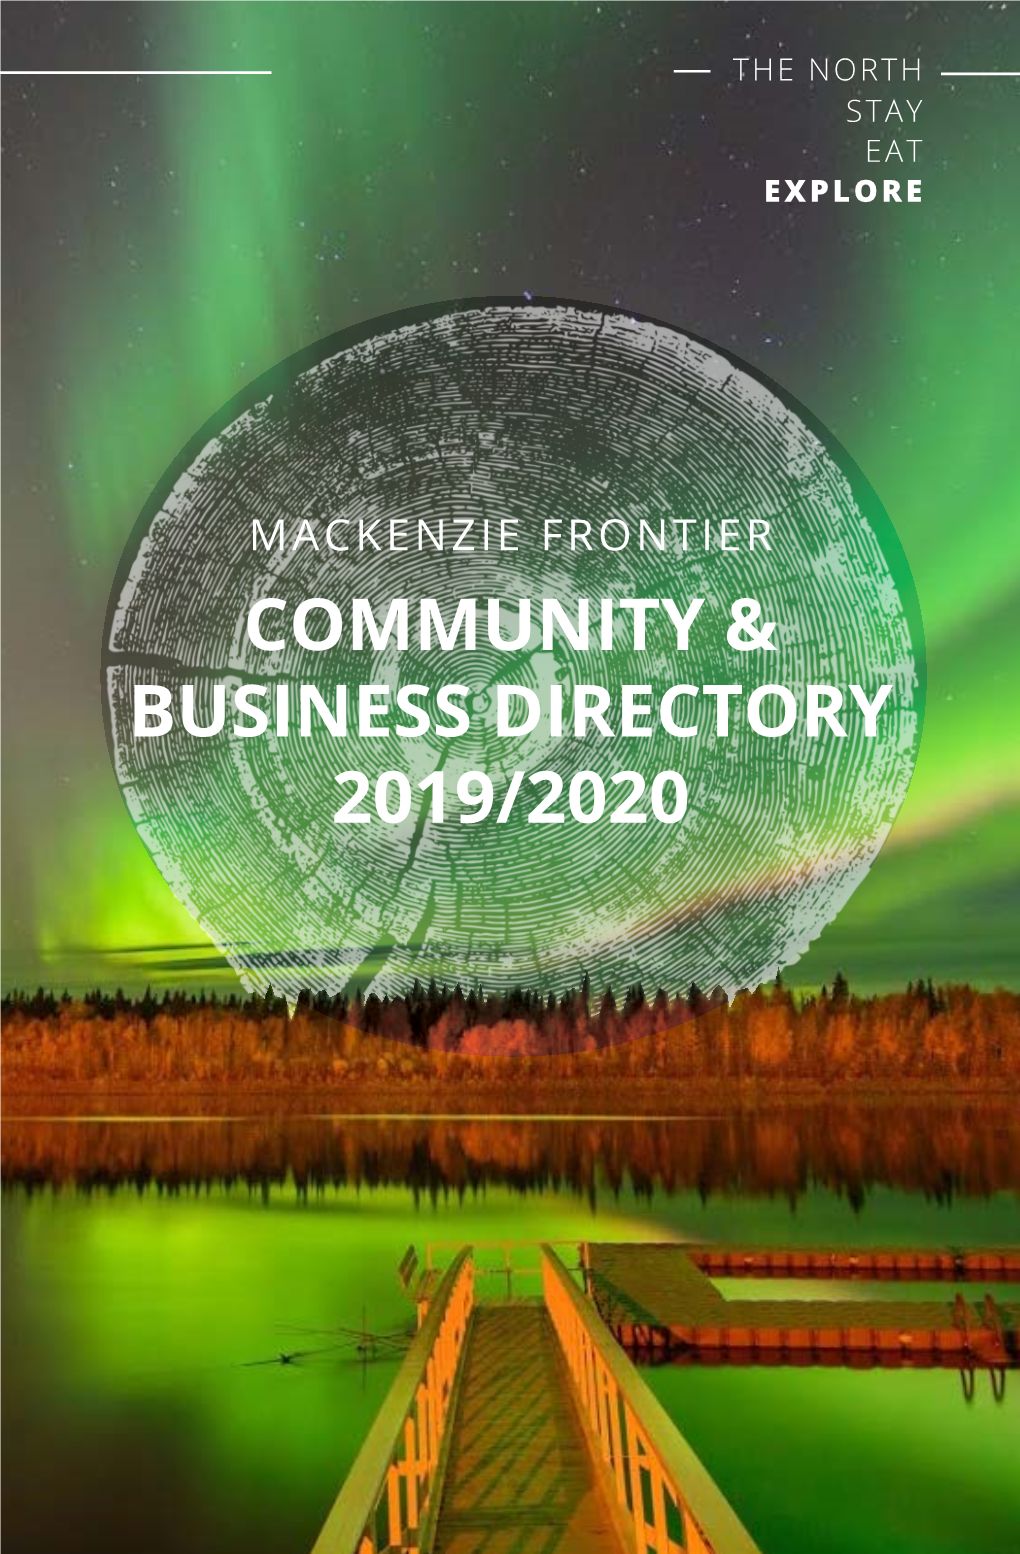 Community & Business Directory 2019/2020